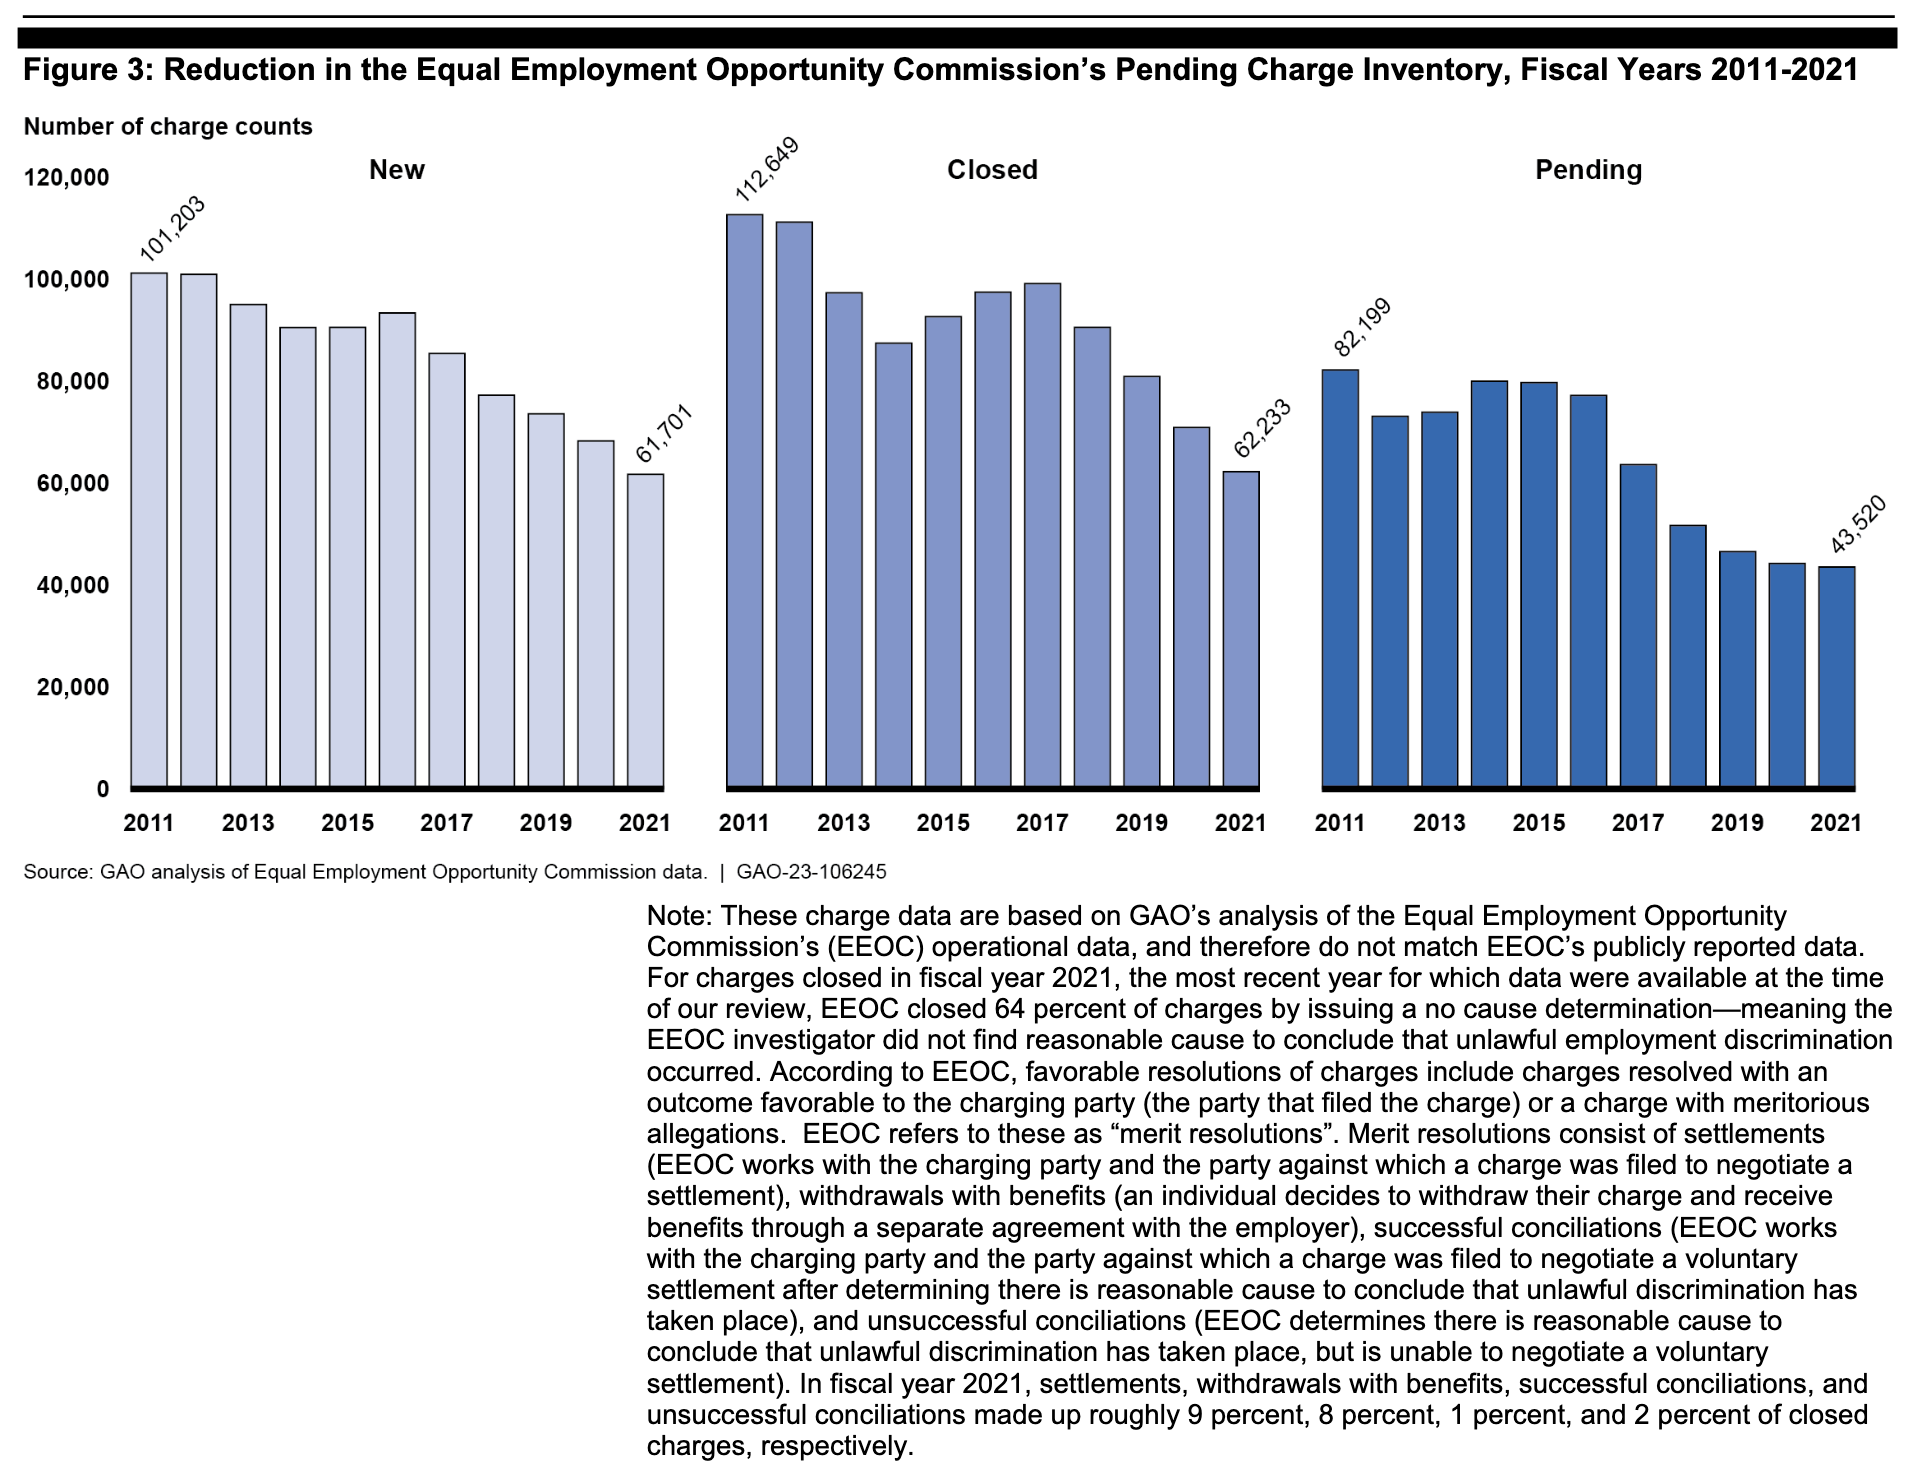 Figure 3: Reduction in the Equal Employment Opportunity Commission’s Pending Charge Inventory, Fiscal Years 2011-2021